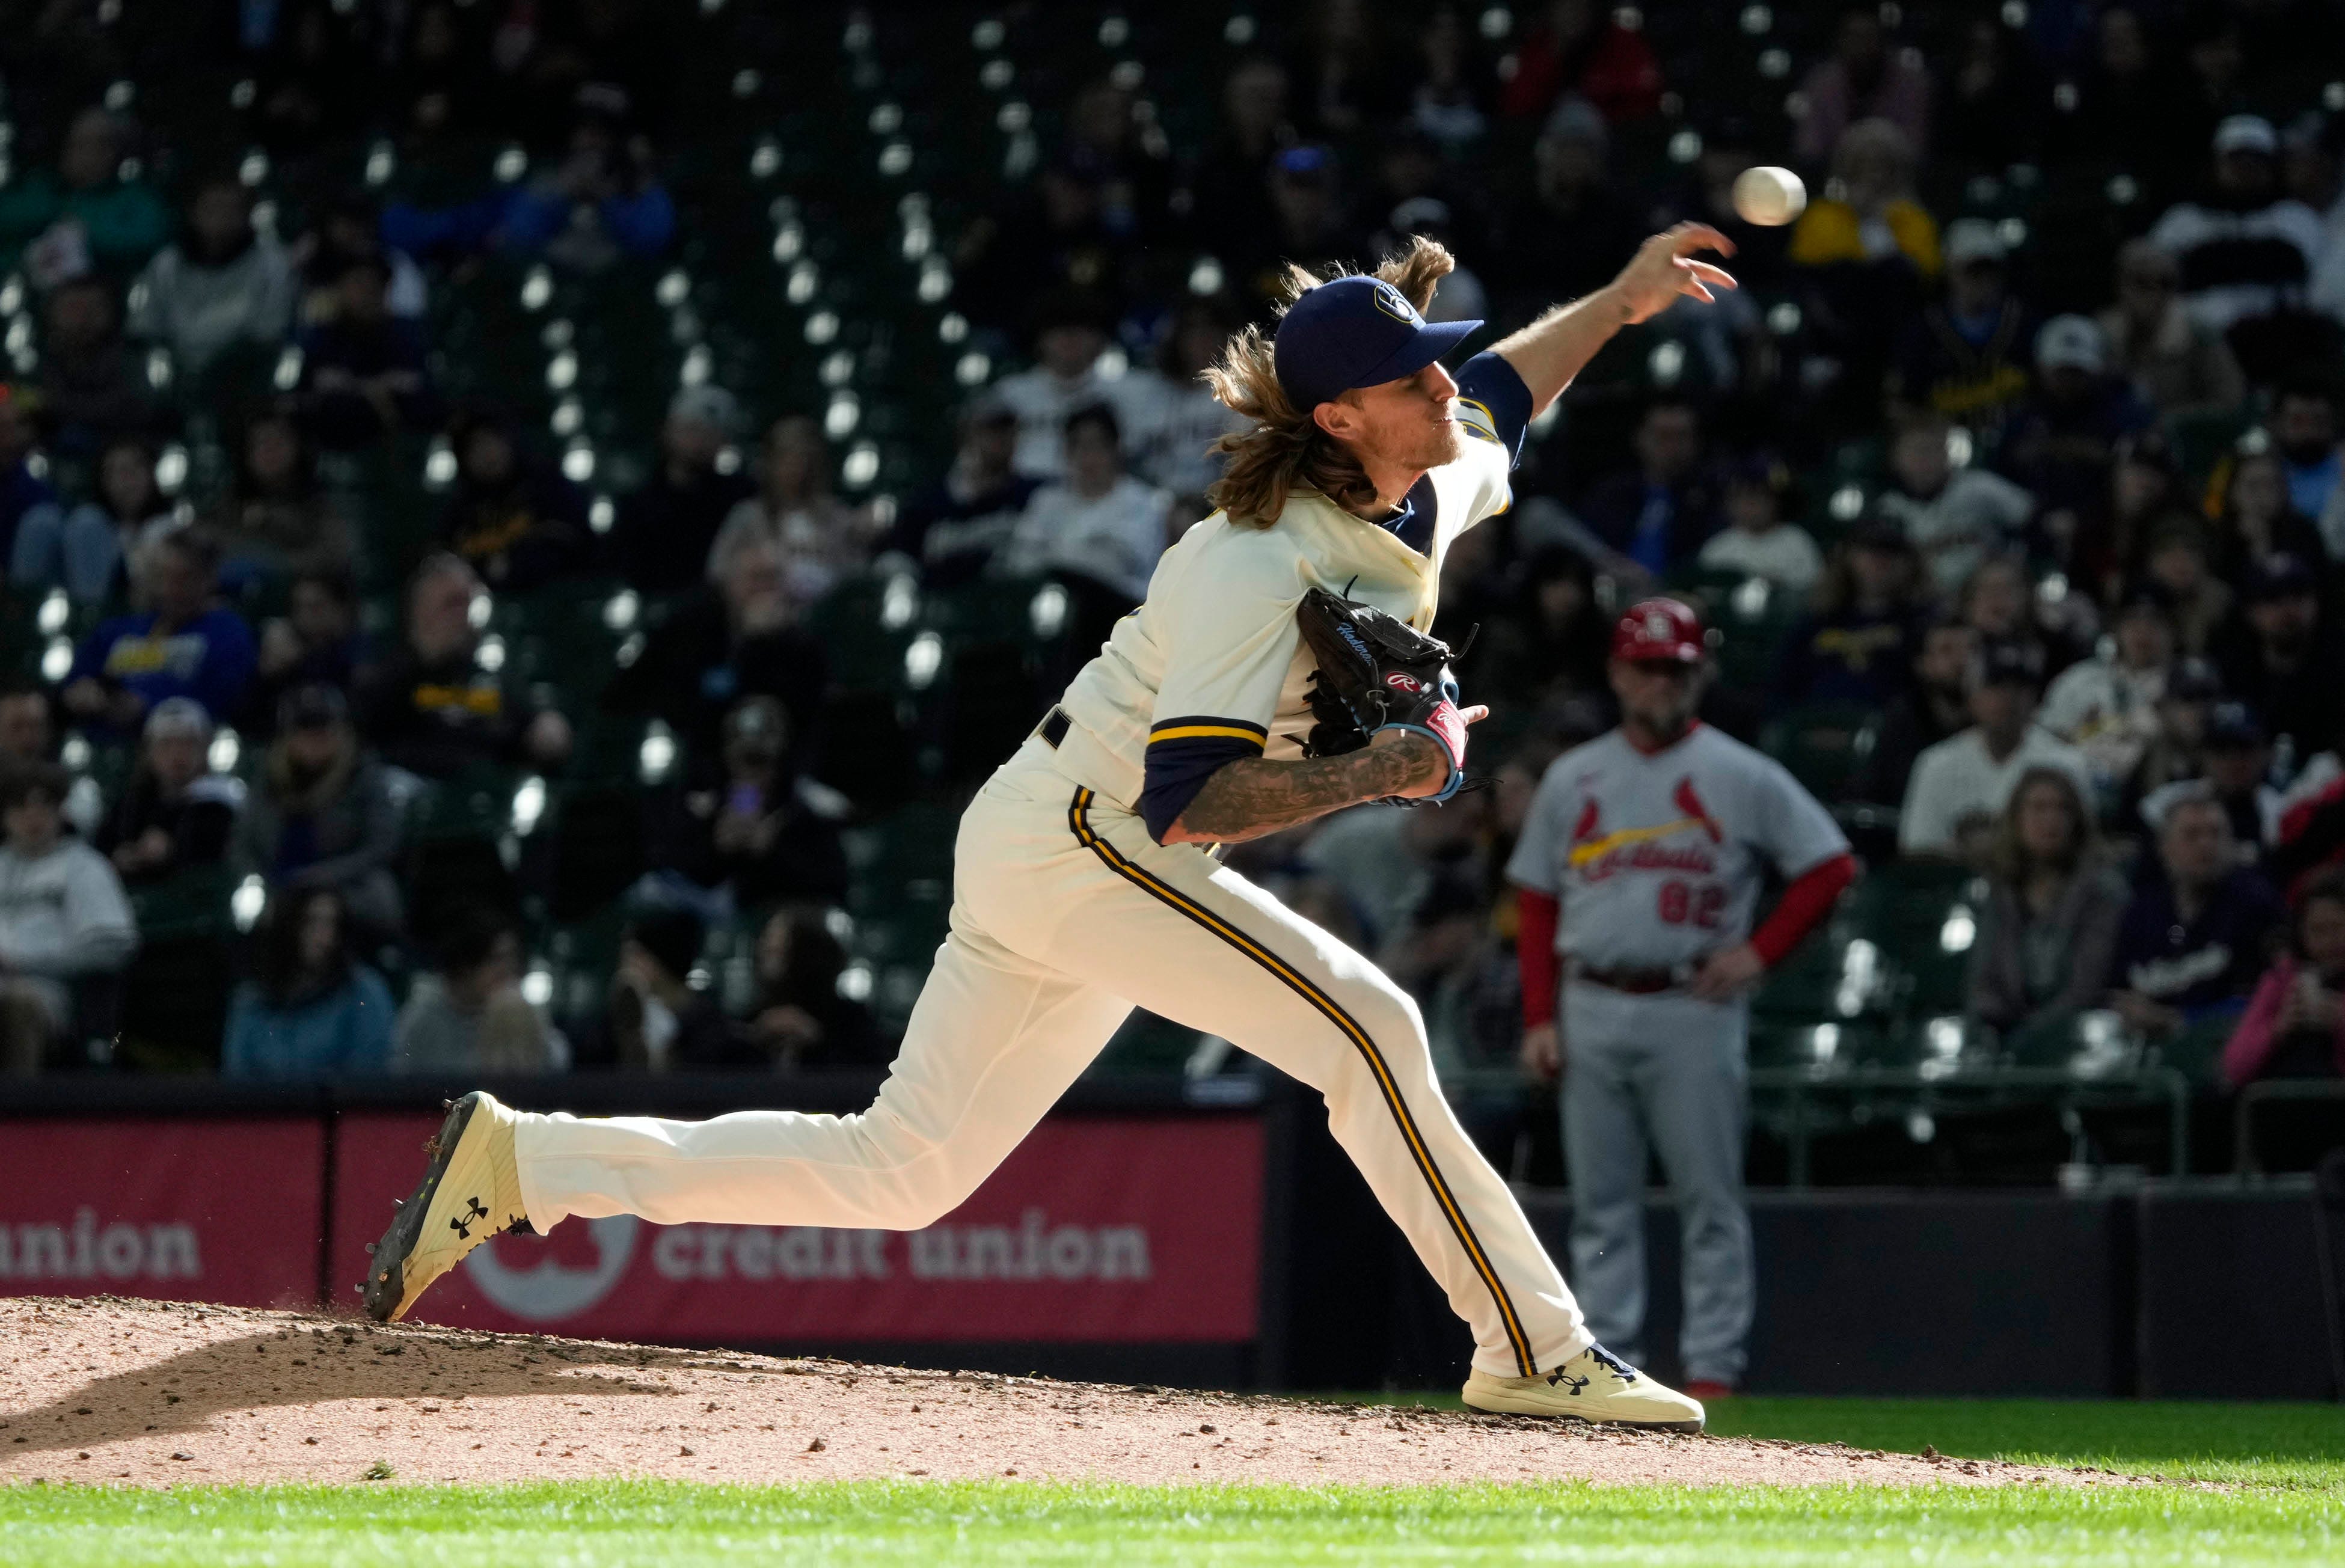 Josh Hader and agent admit to ESPN they crafted usage guidelines after losing arbitration case to Brewers